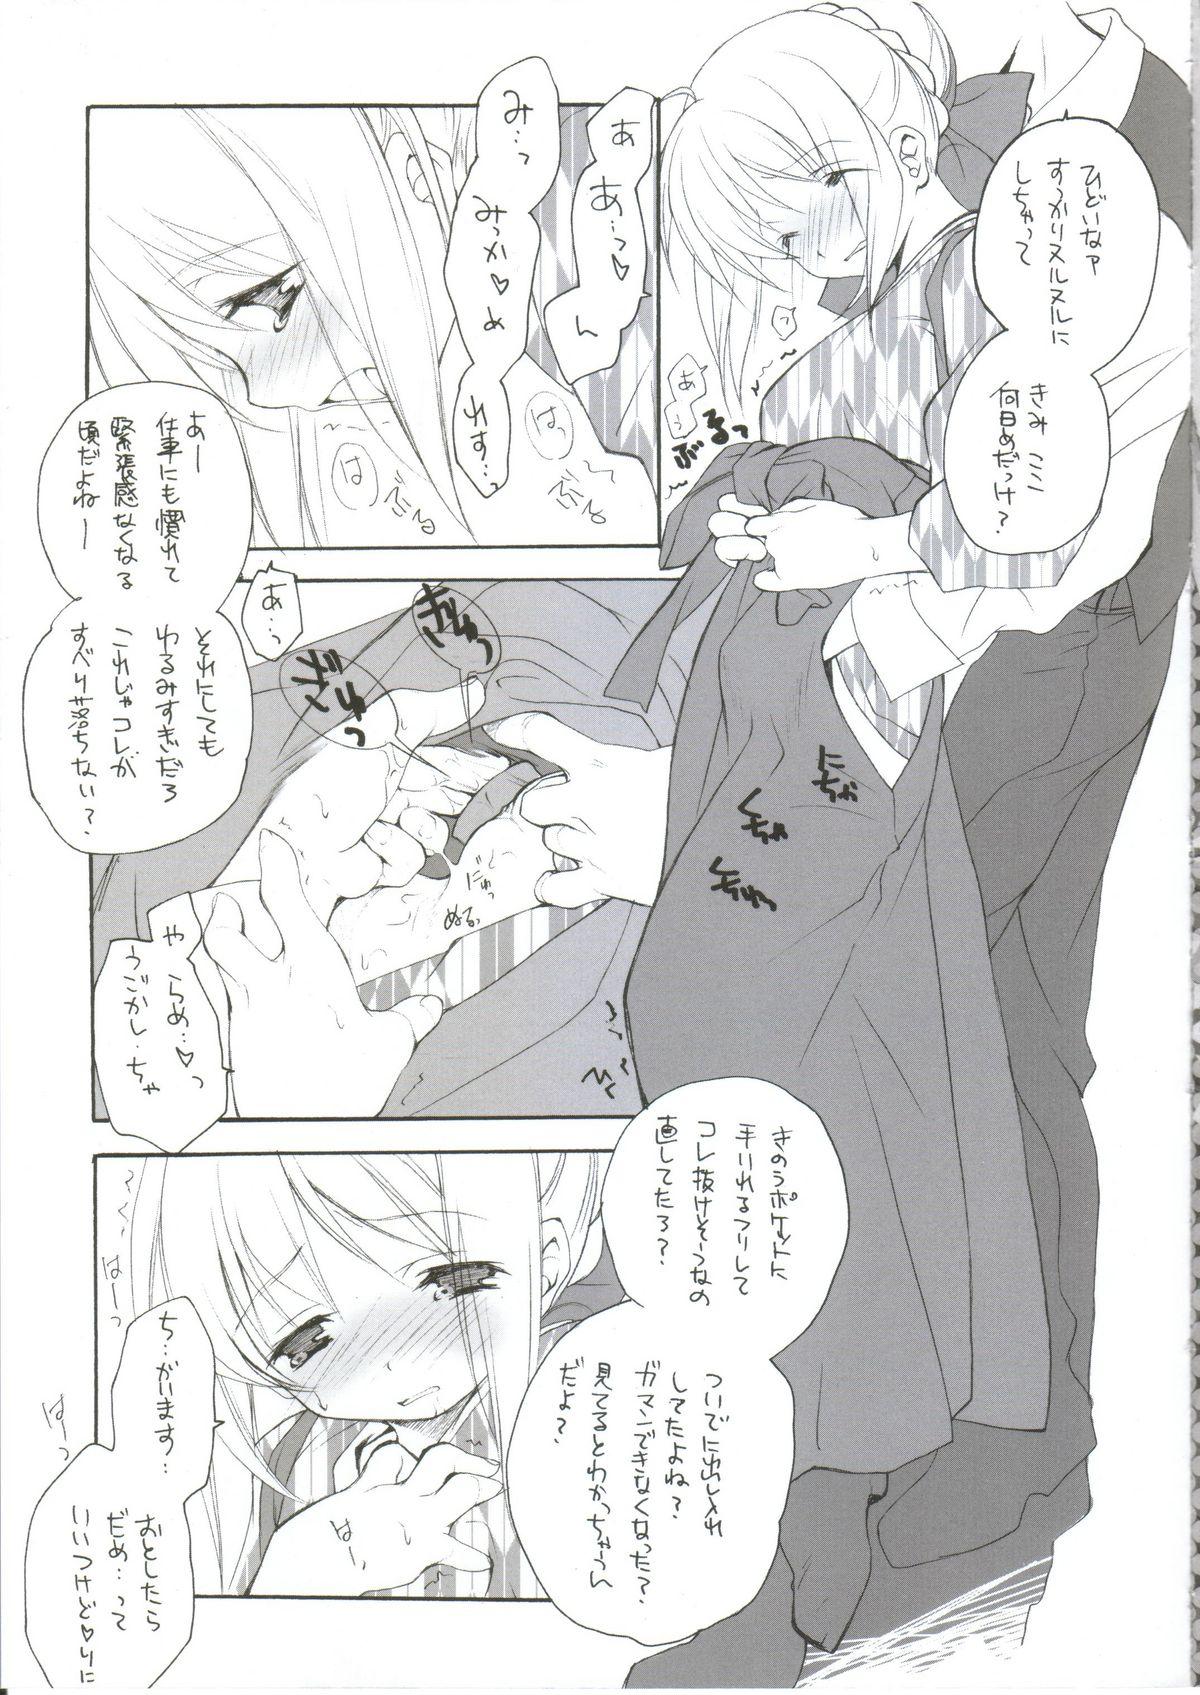 Masterbate Citron Ribbon 9 - Fate stay night Groping - Page 4